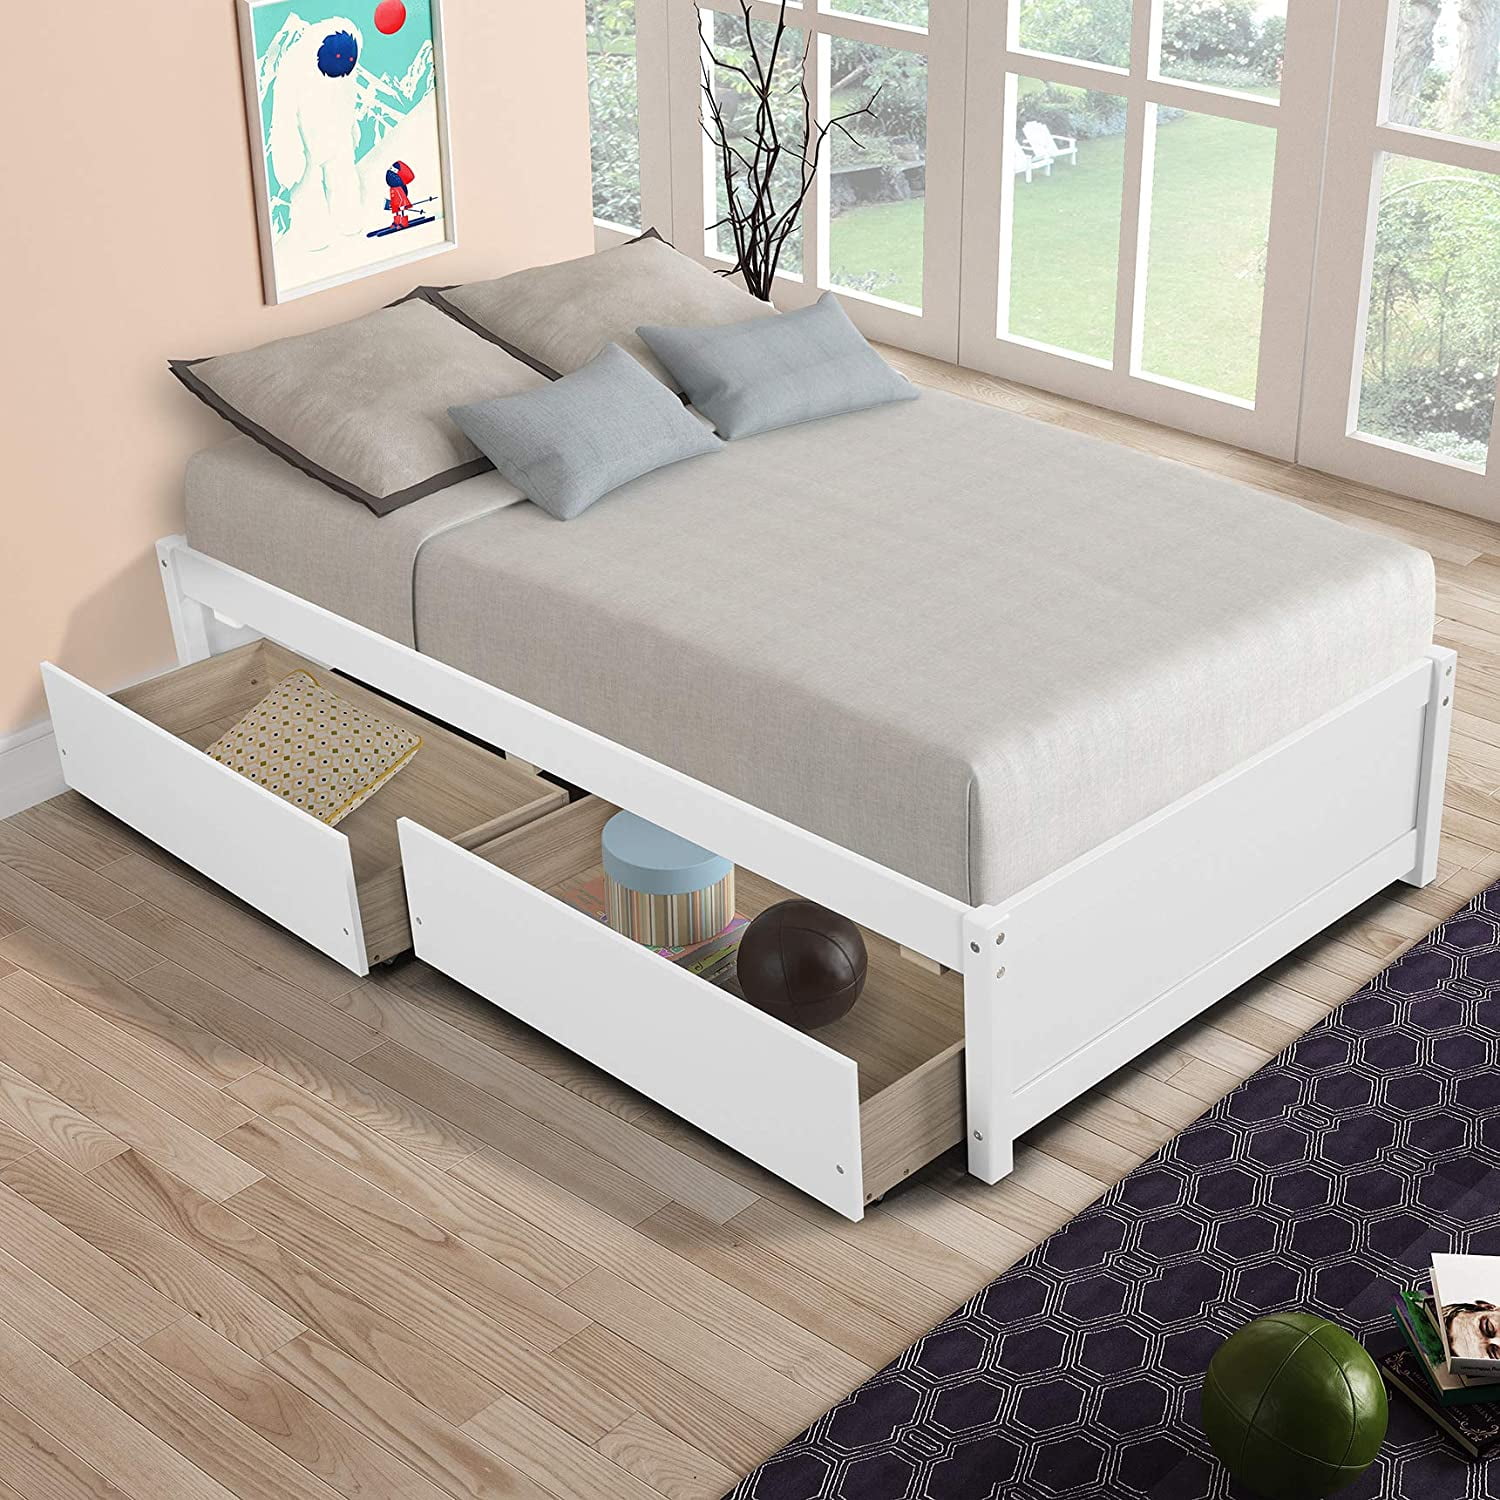 Pine Wood Children Toddler Bed Frame slatted with mattress storage drawer COLORS 